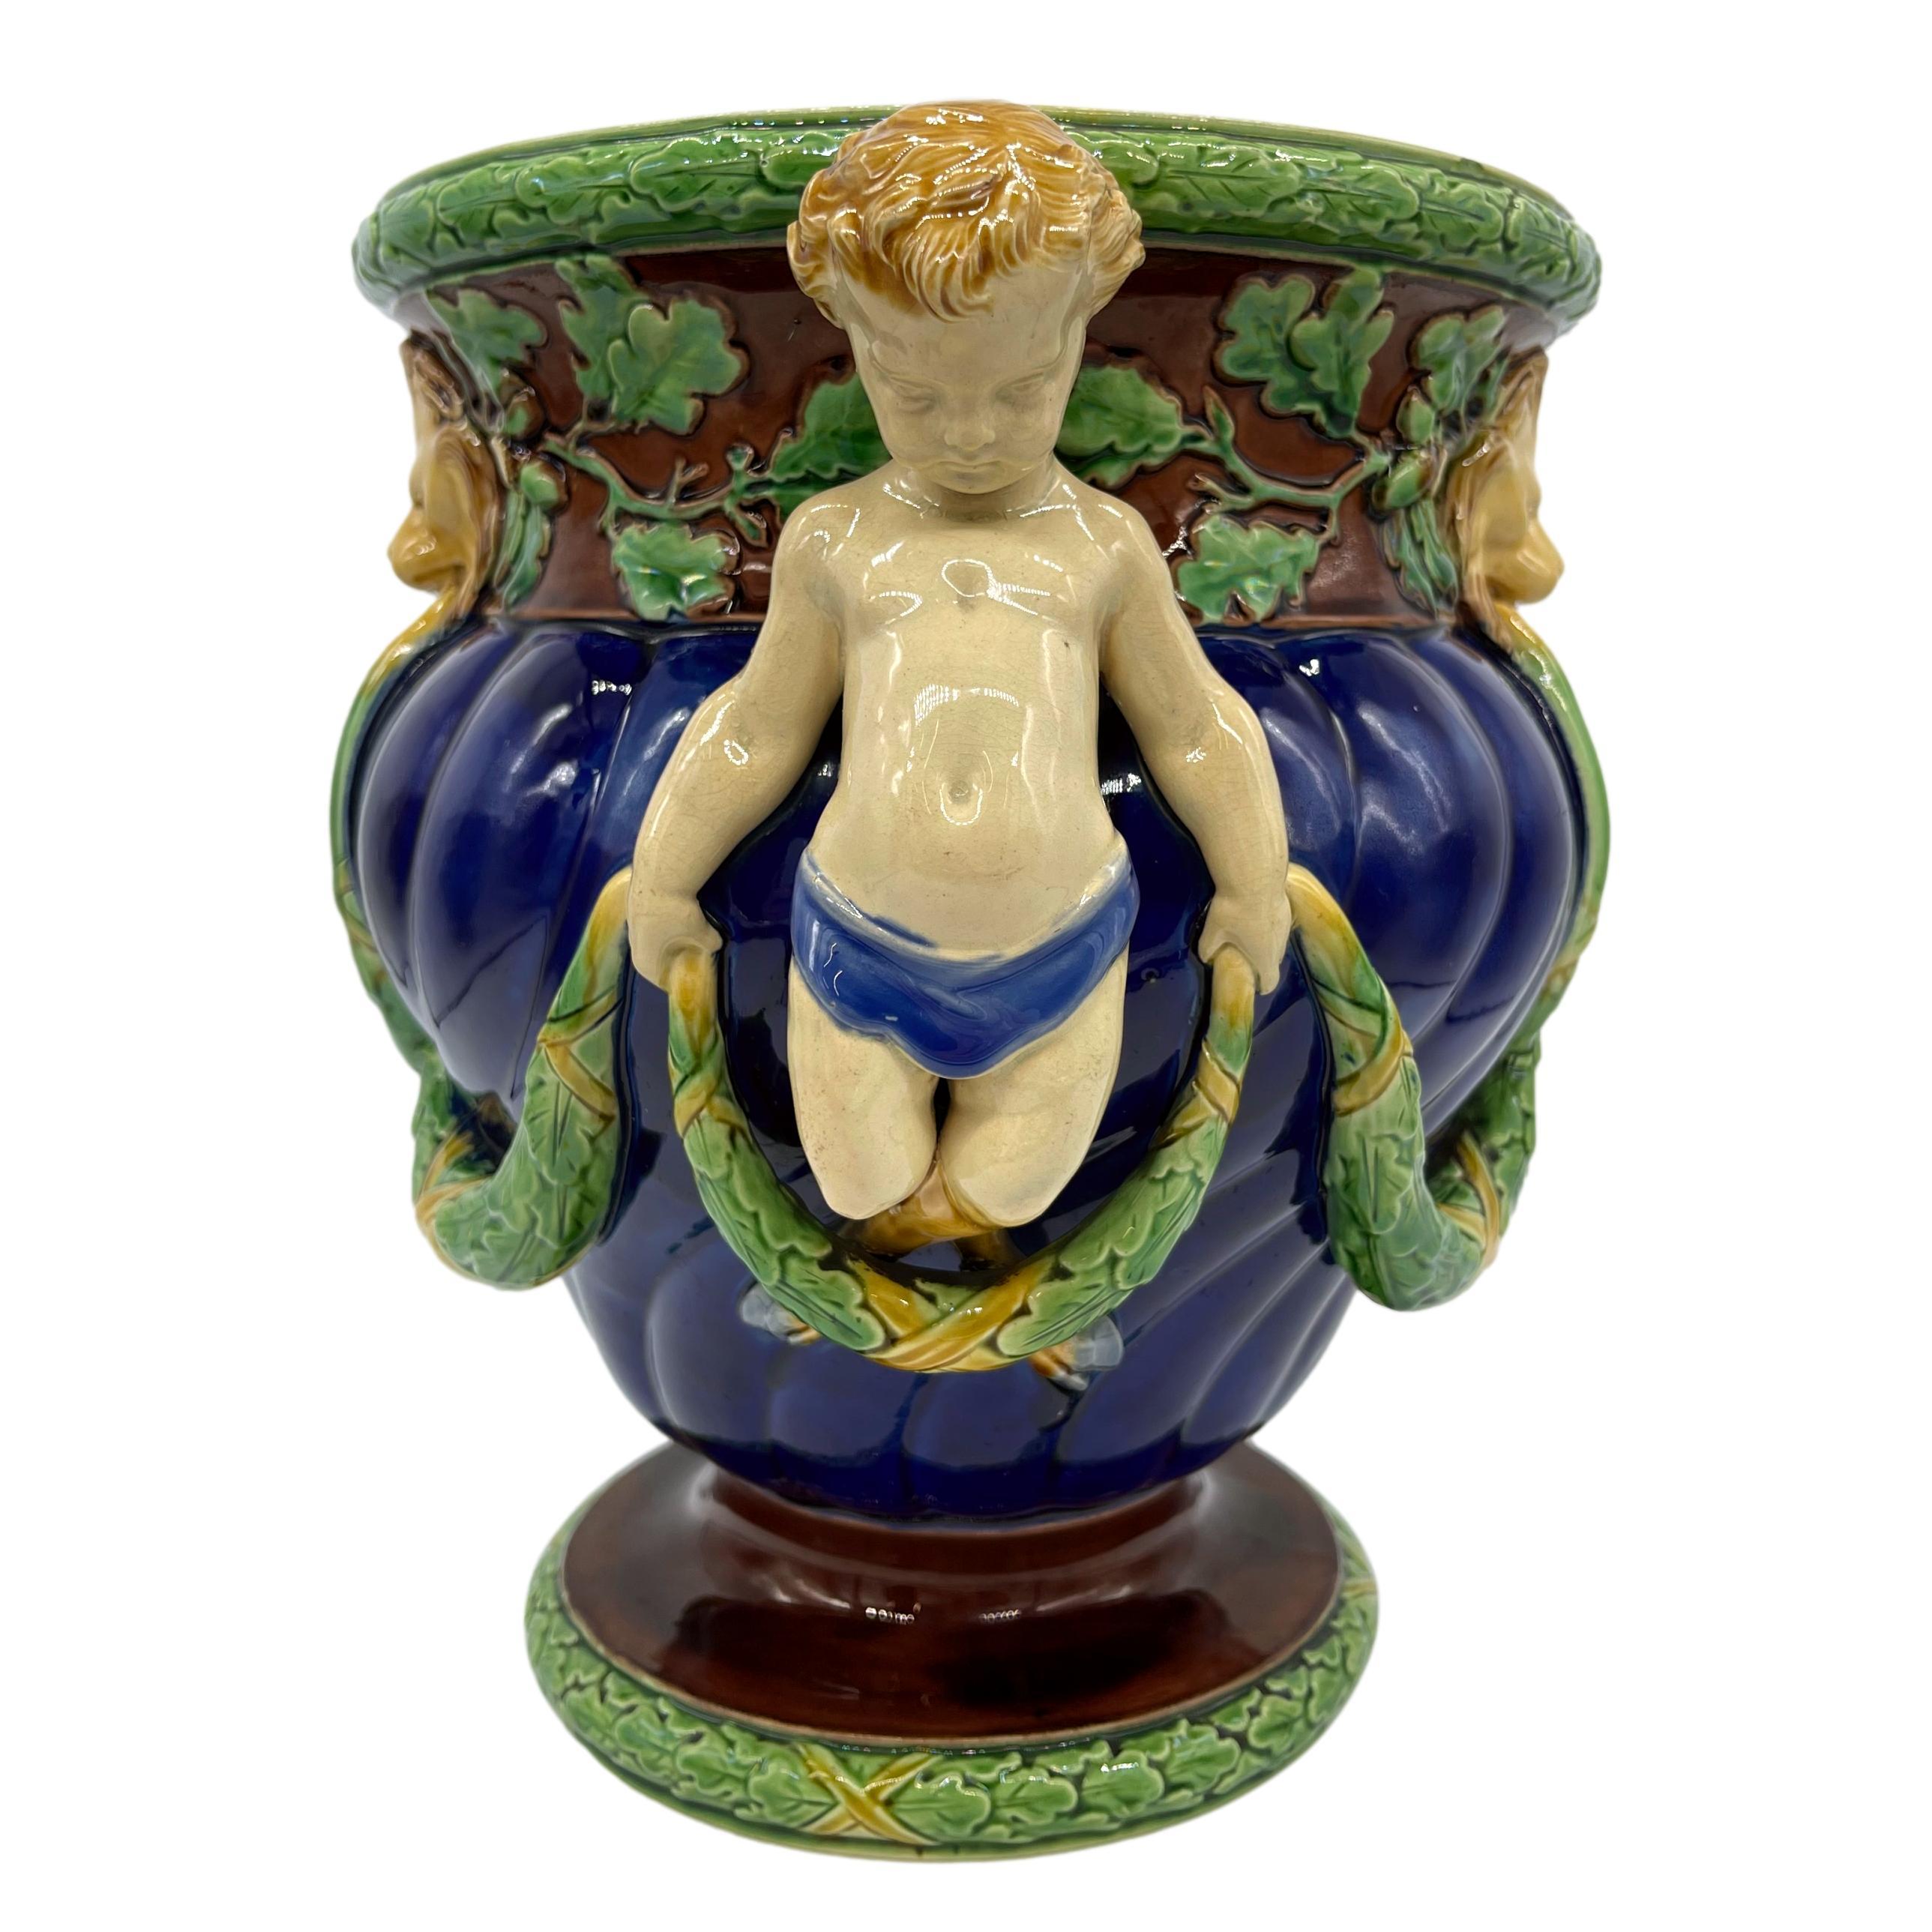 Victorian Minton Majolica Wine Cooler with Fauns, Oak Garlands on Cobalt, Dated 1865